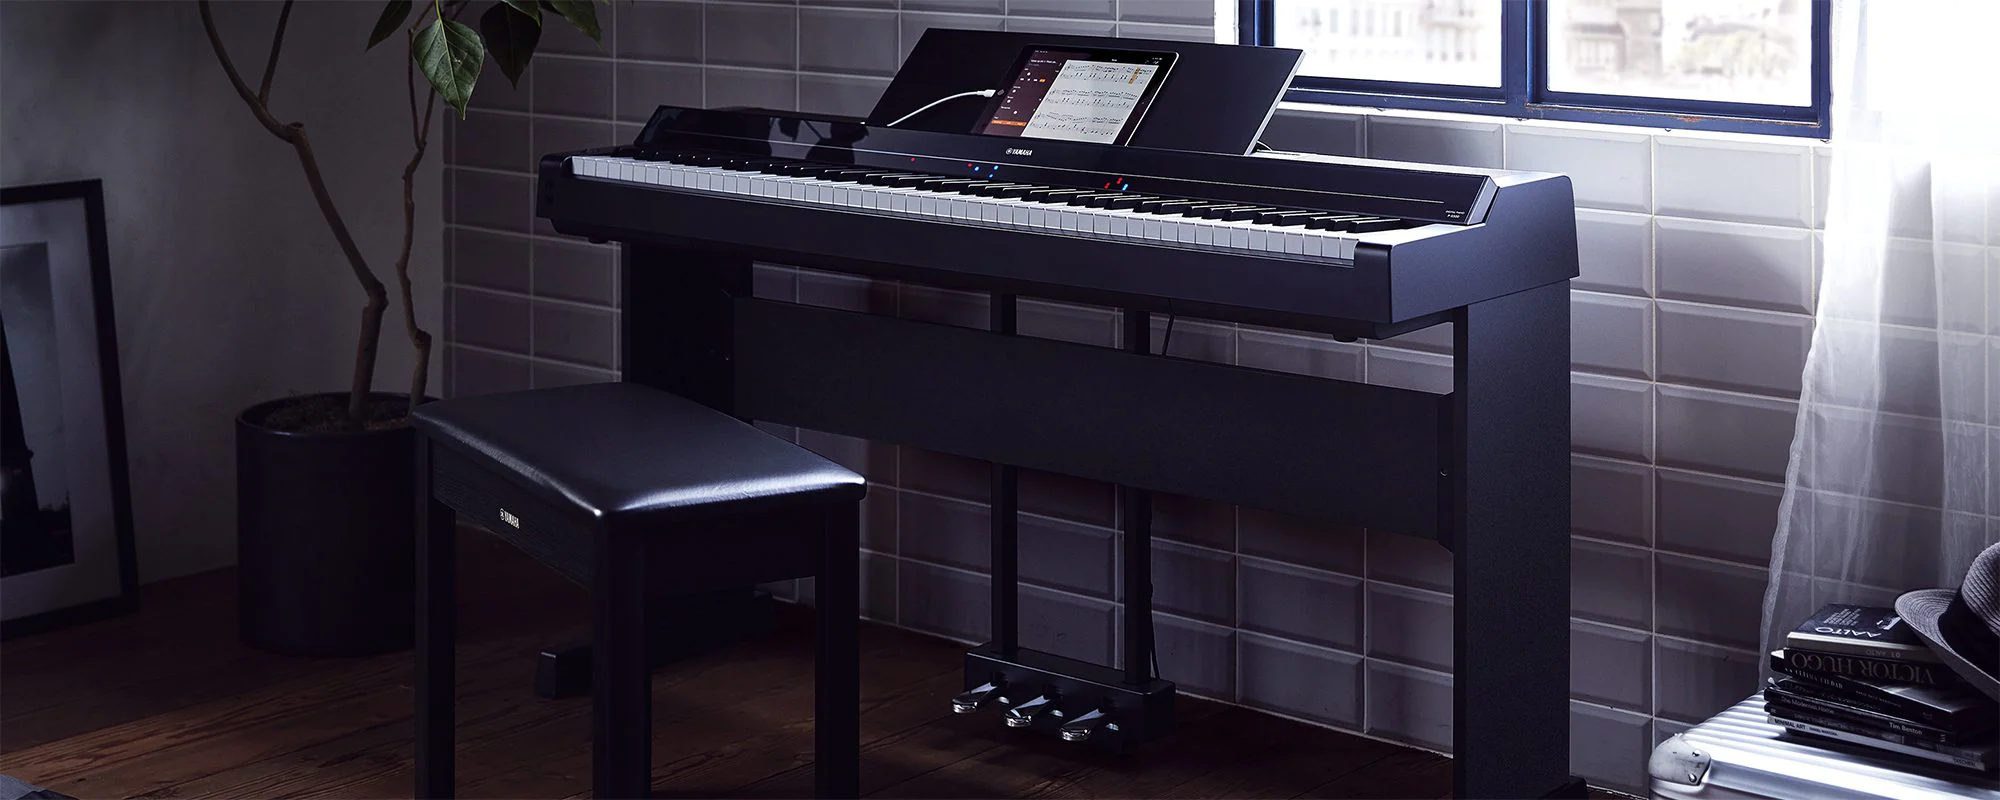 Review Piano điện Yamaha P-S500